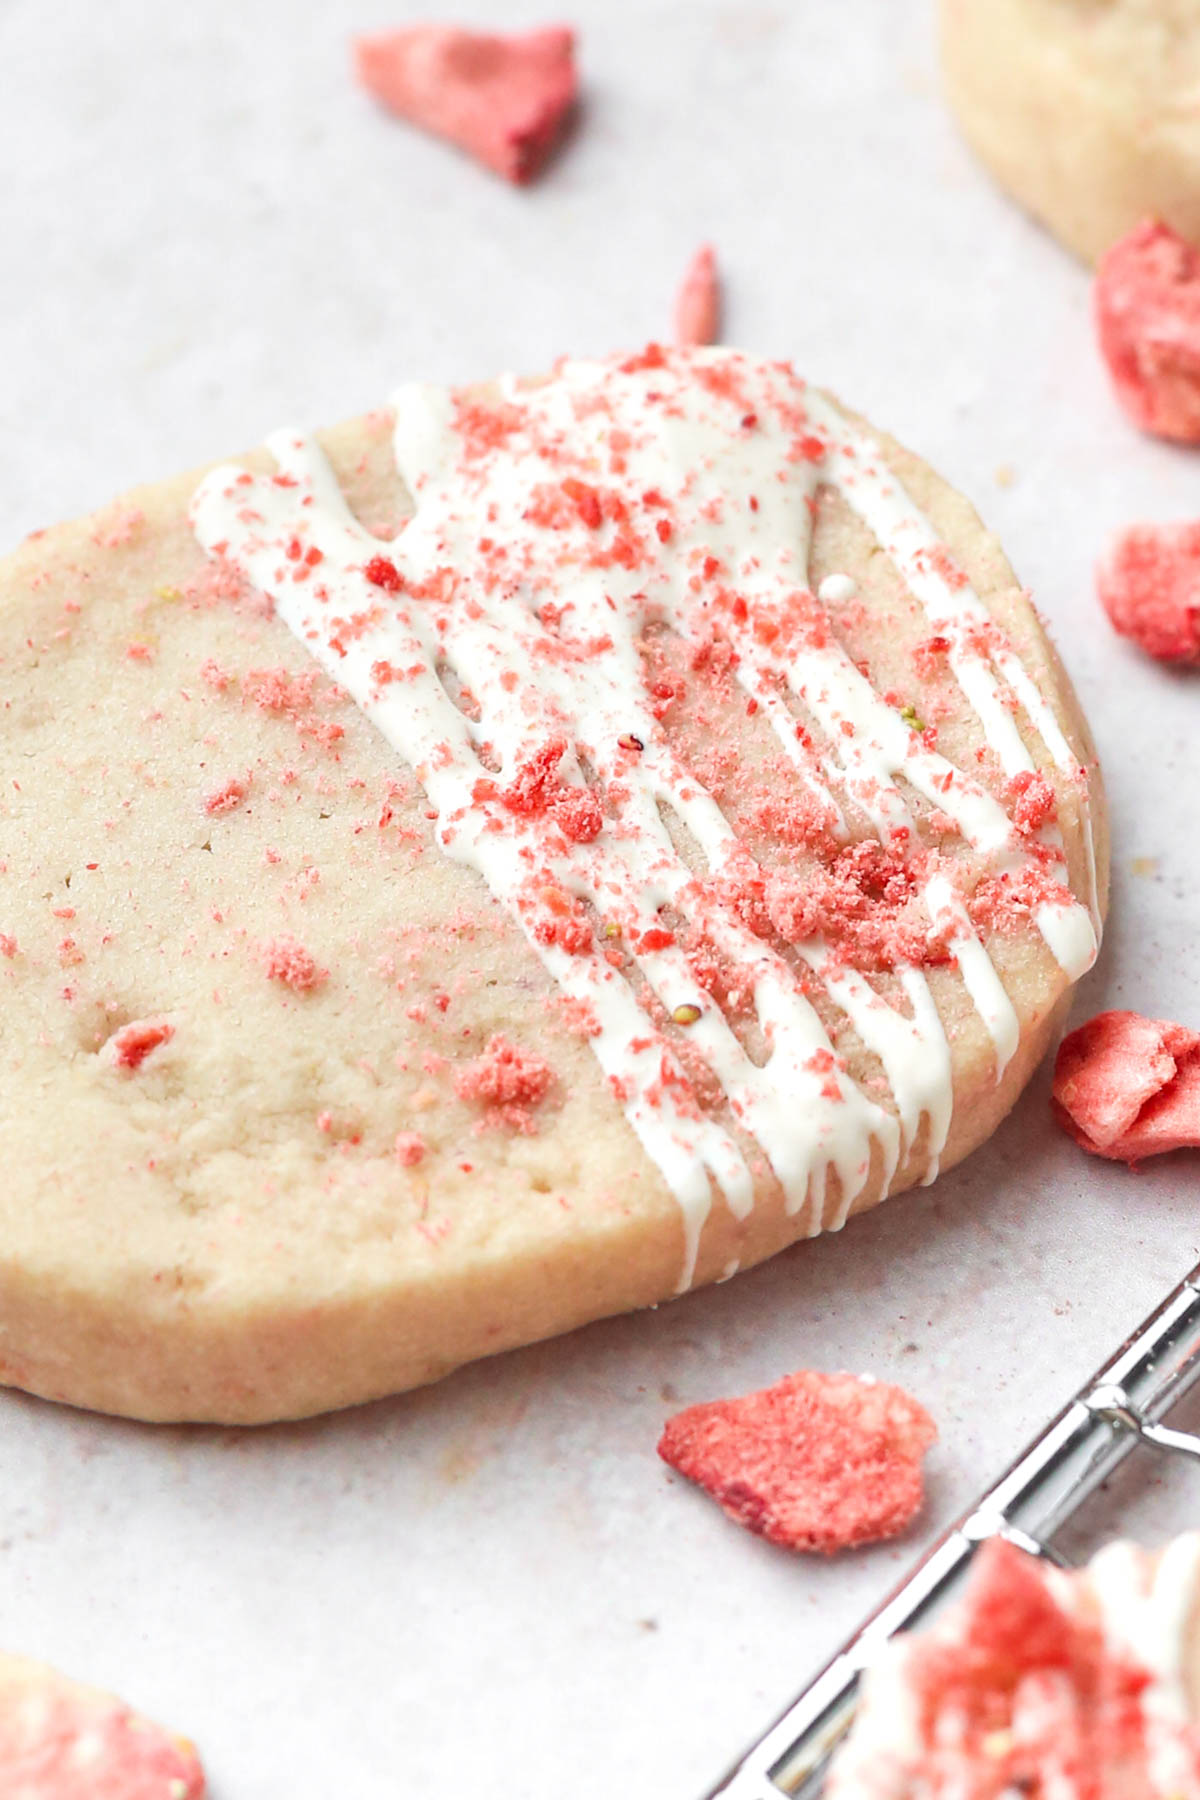 Close-up photo of a strawberry shortbread cookie with white chocolate drizzle and strawberry powder sprinkled on top, shown from an angle.